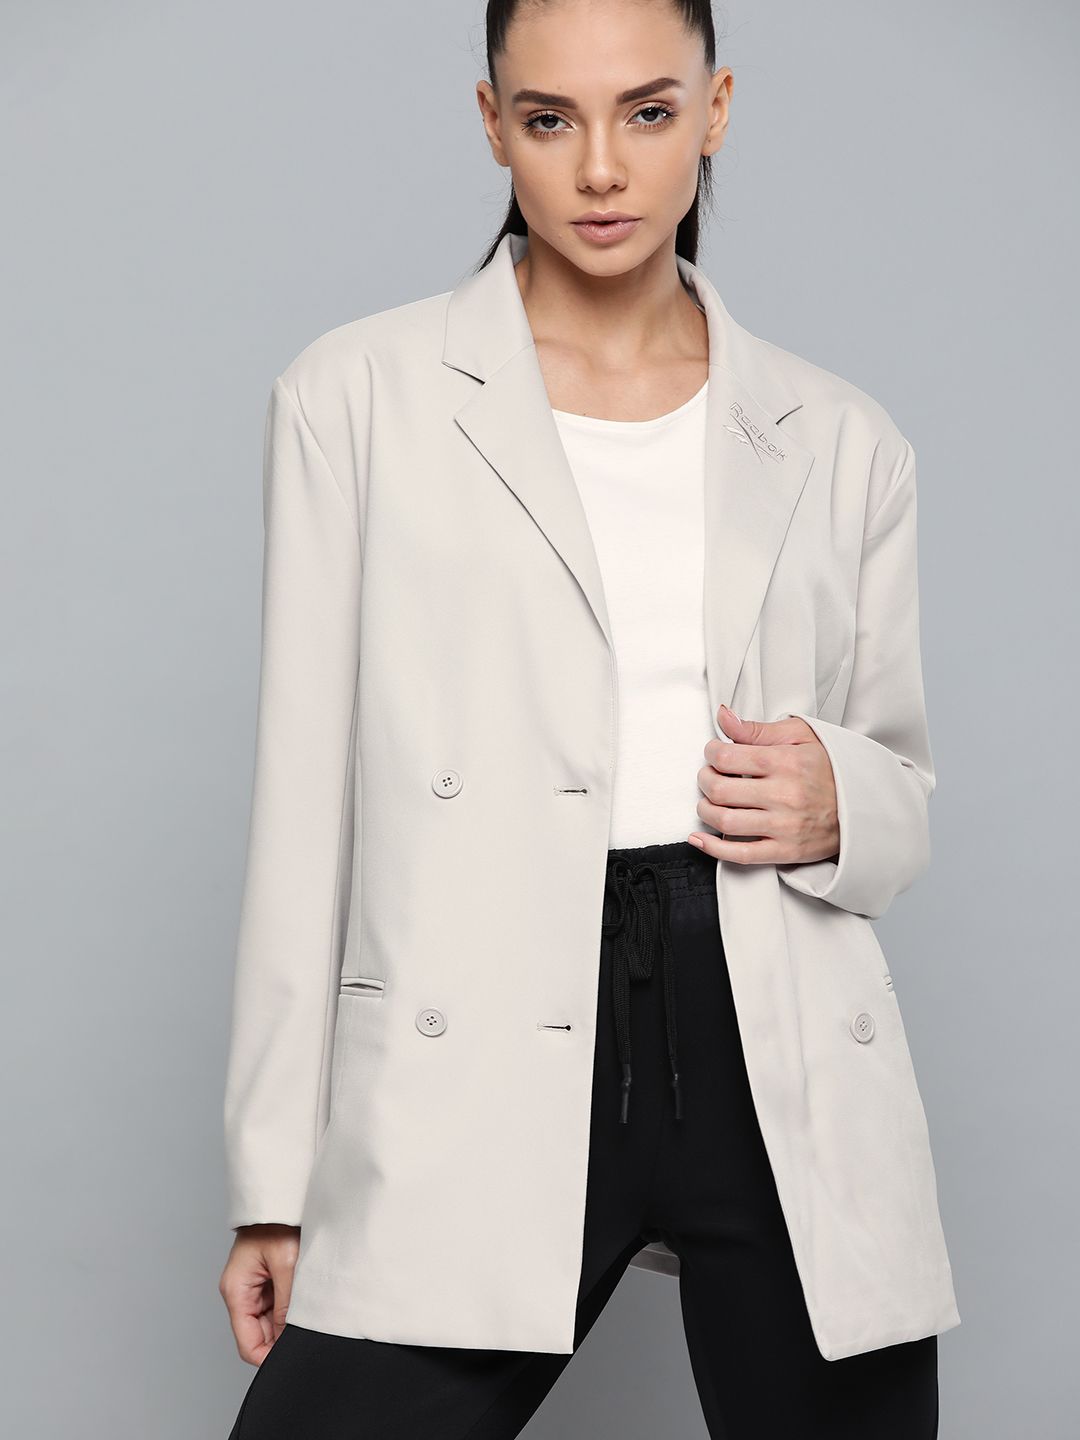 Reebok Classic Women Light Grey Double-Breasted Oversized Fit Solid Blazer Price in India